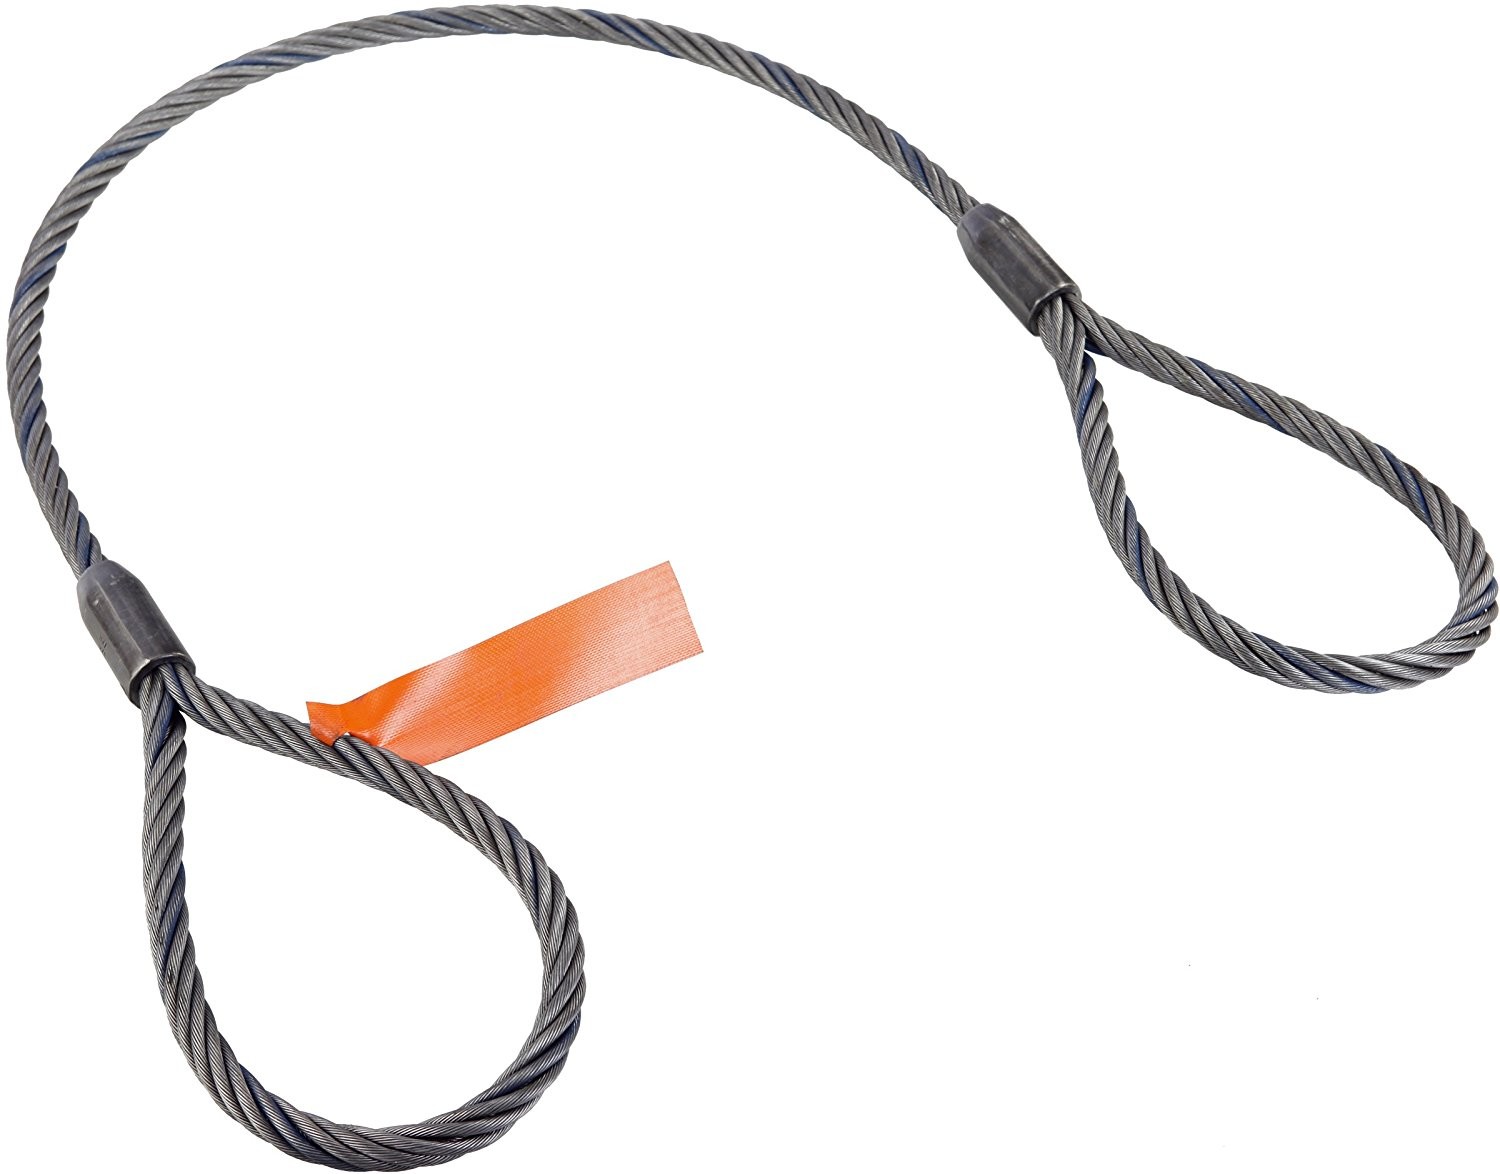 Impact Resist Wire Rope Sling Flemish Eye And Eye Type High Rated